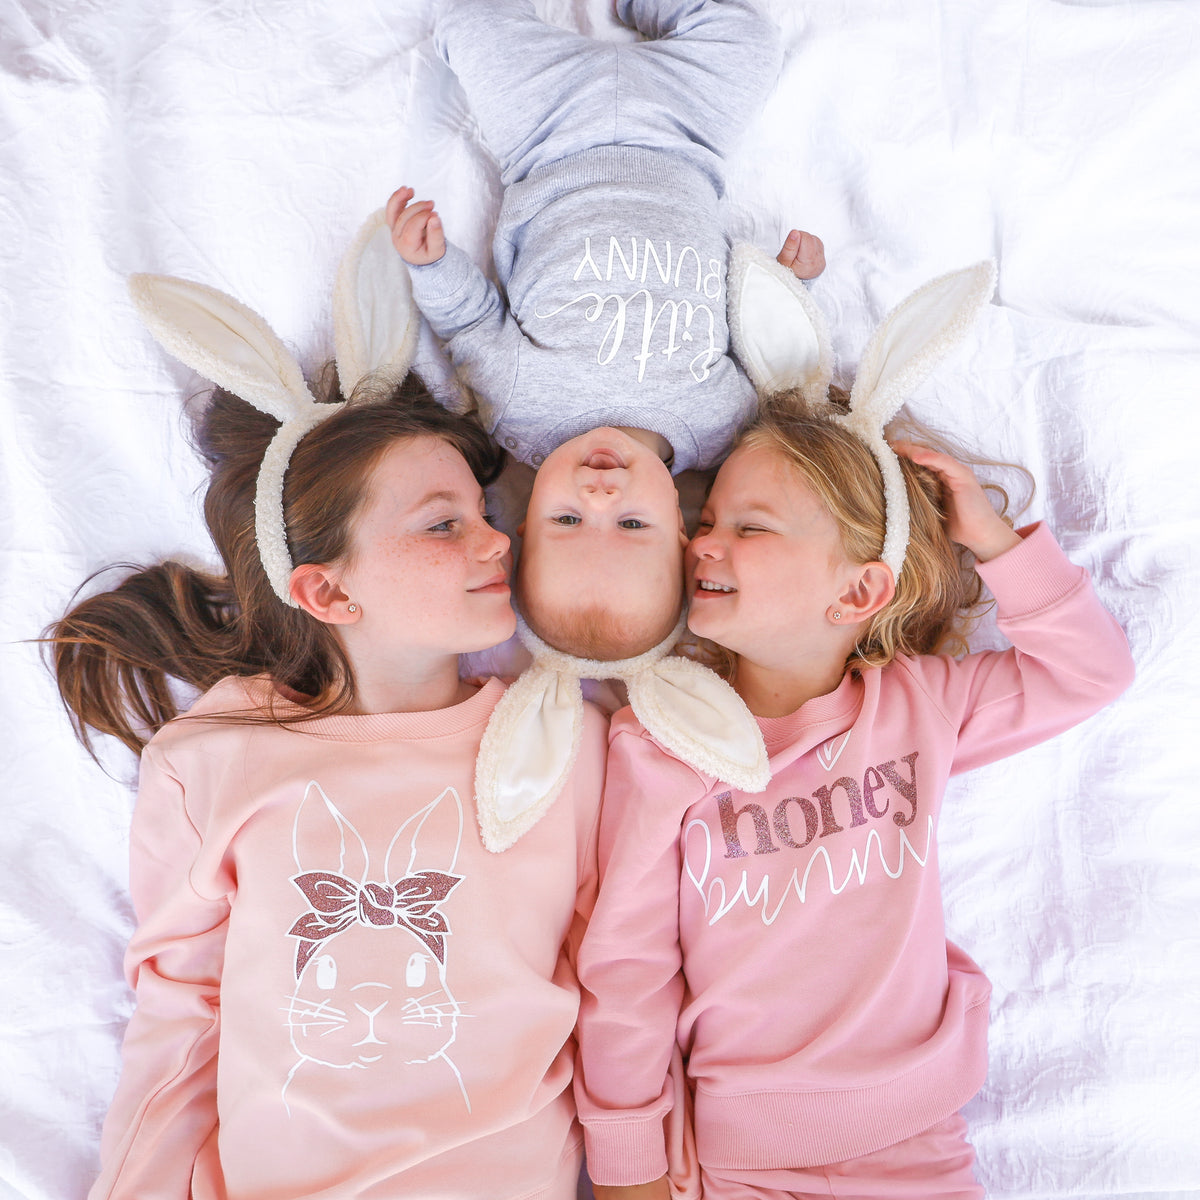 Easter Personalised Crew Neck - Honey Bunny - Pink